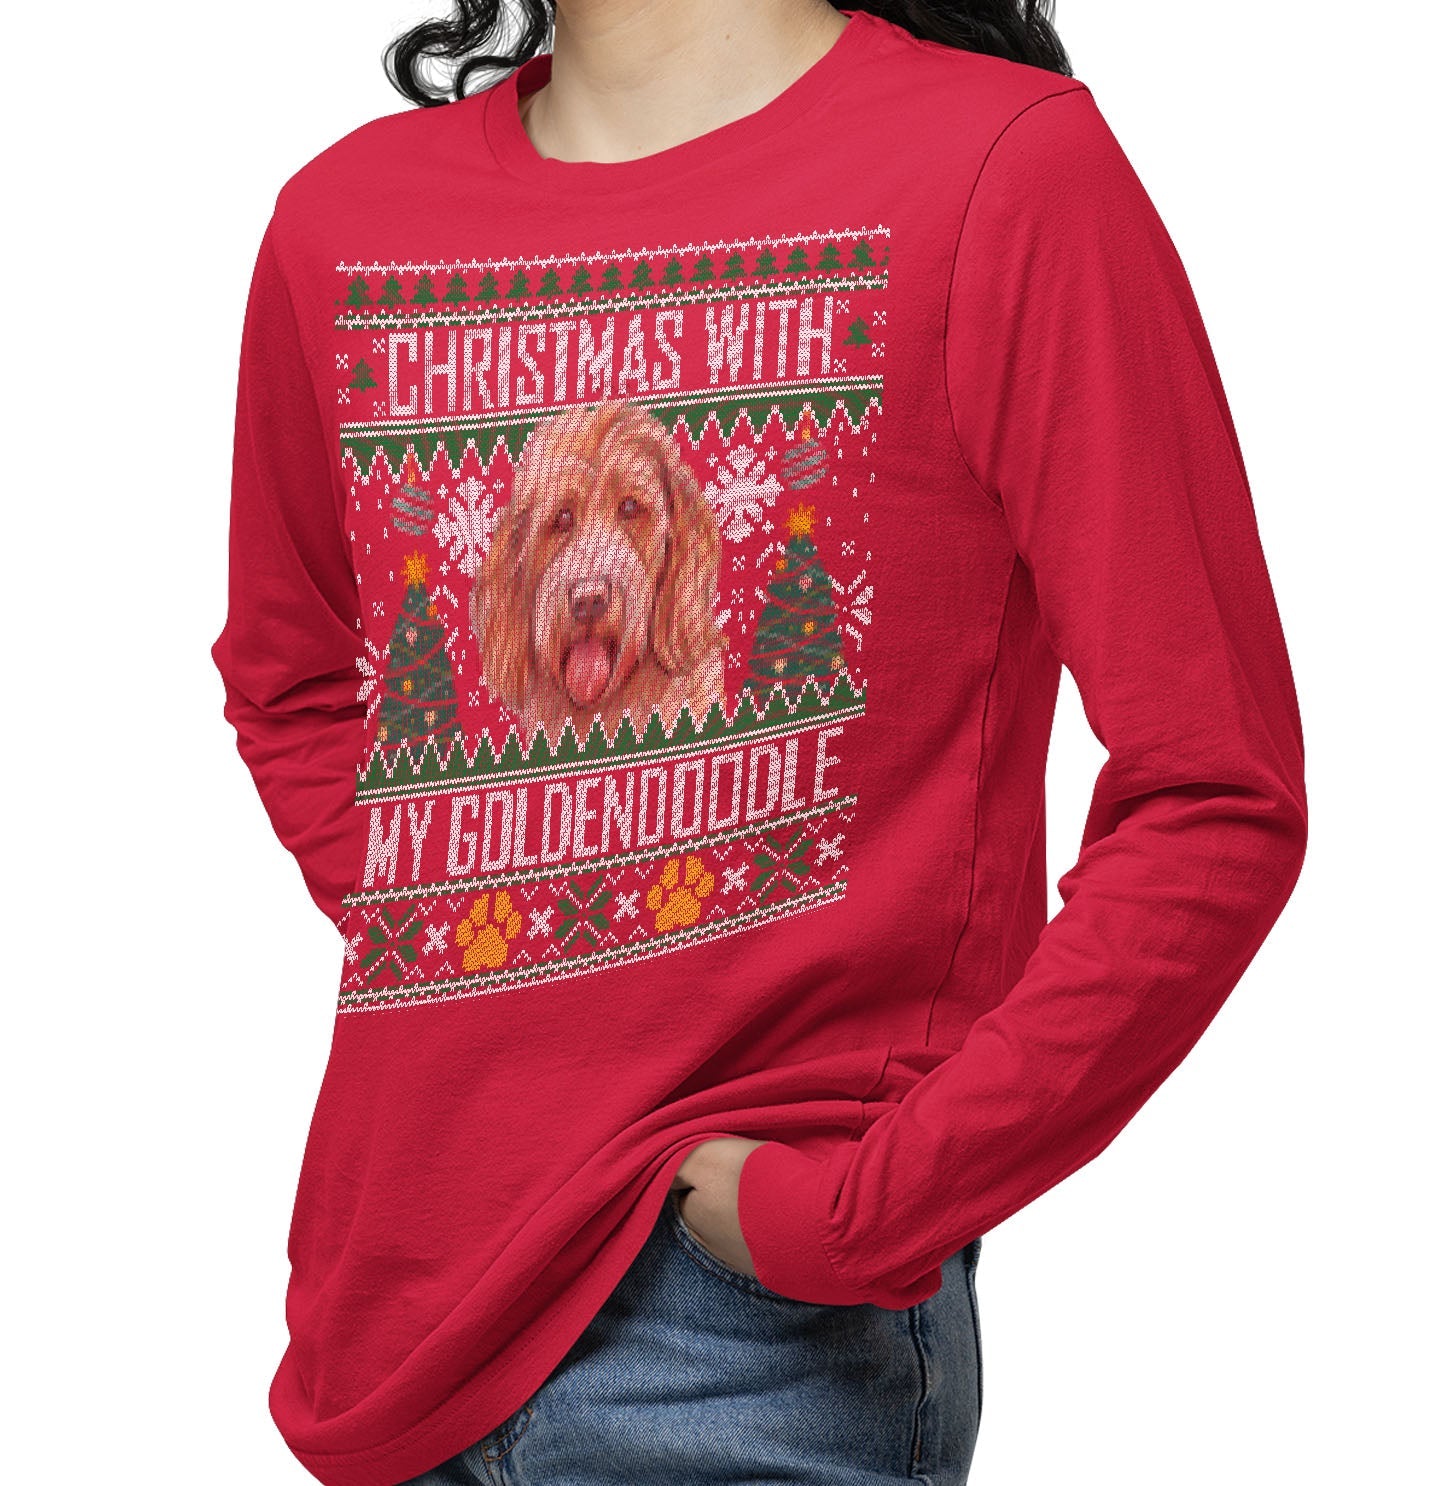 Ugly Sweater Christmas with My Goldendoodle - Adult Unisex Long Sleeve T-Shirt